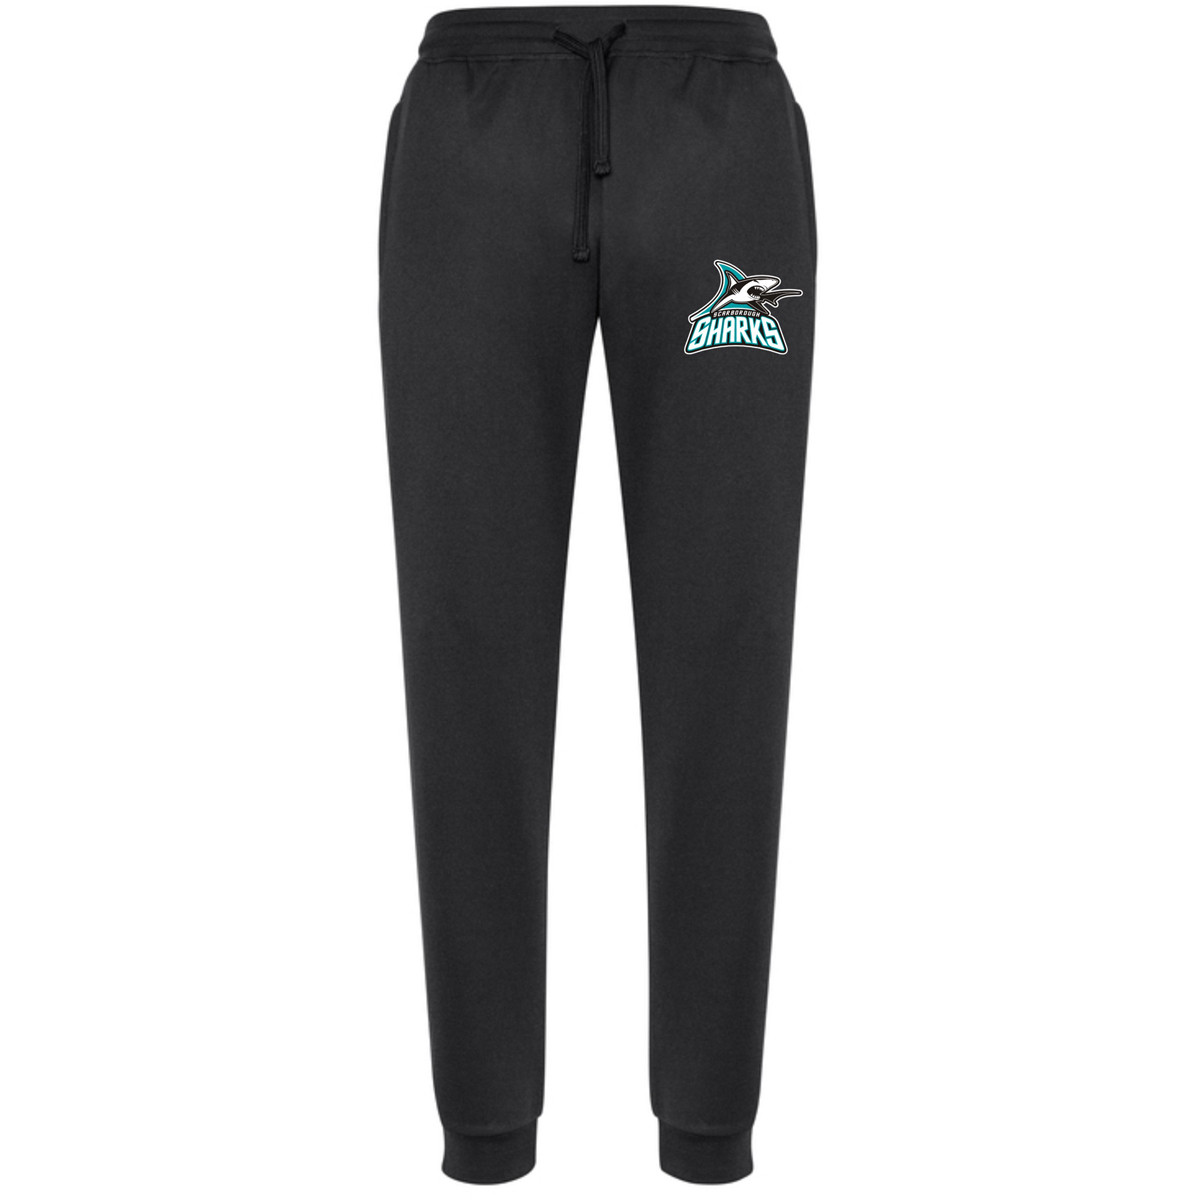 Scarborough Sharks Biz Collection Youth Hype Pant - Black - YouWear.ca